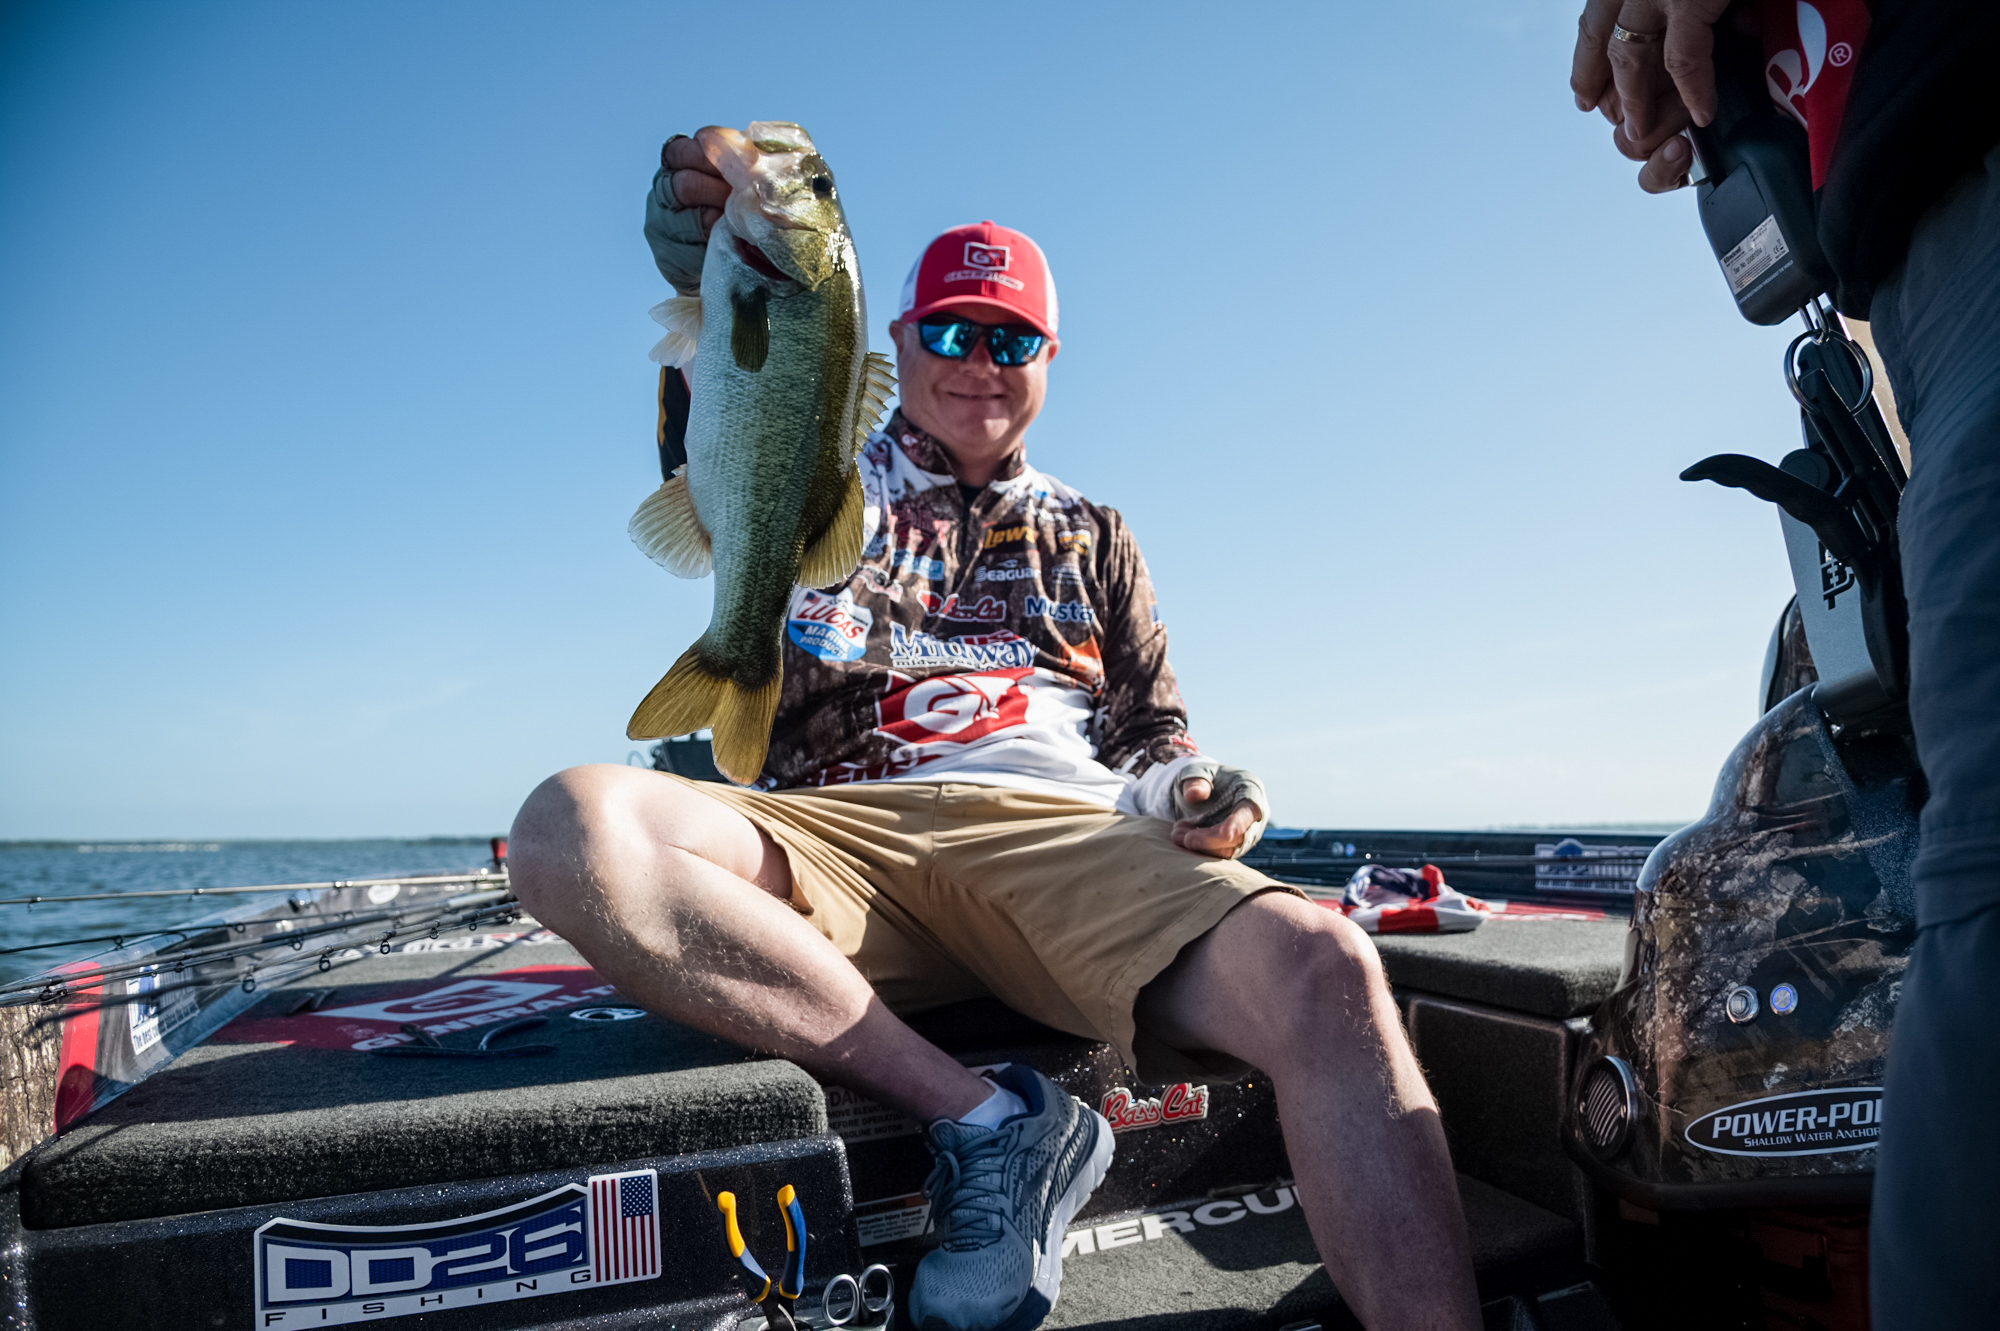 New Yorker Catches Monster Bass on First Cast at Lake Sam Rayburn